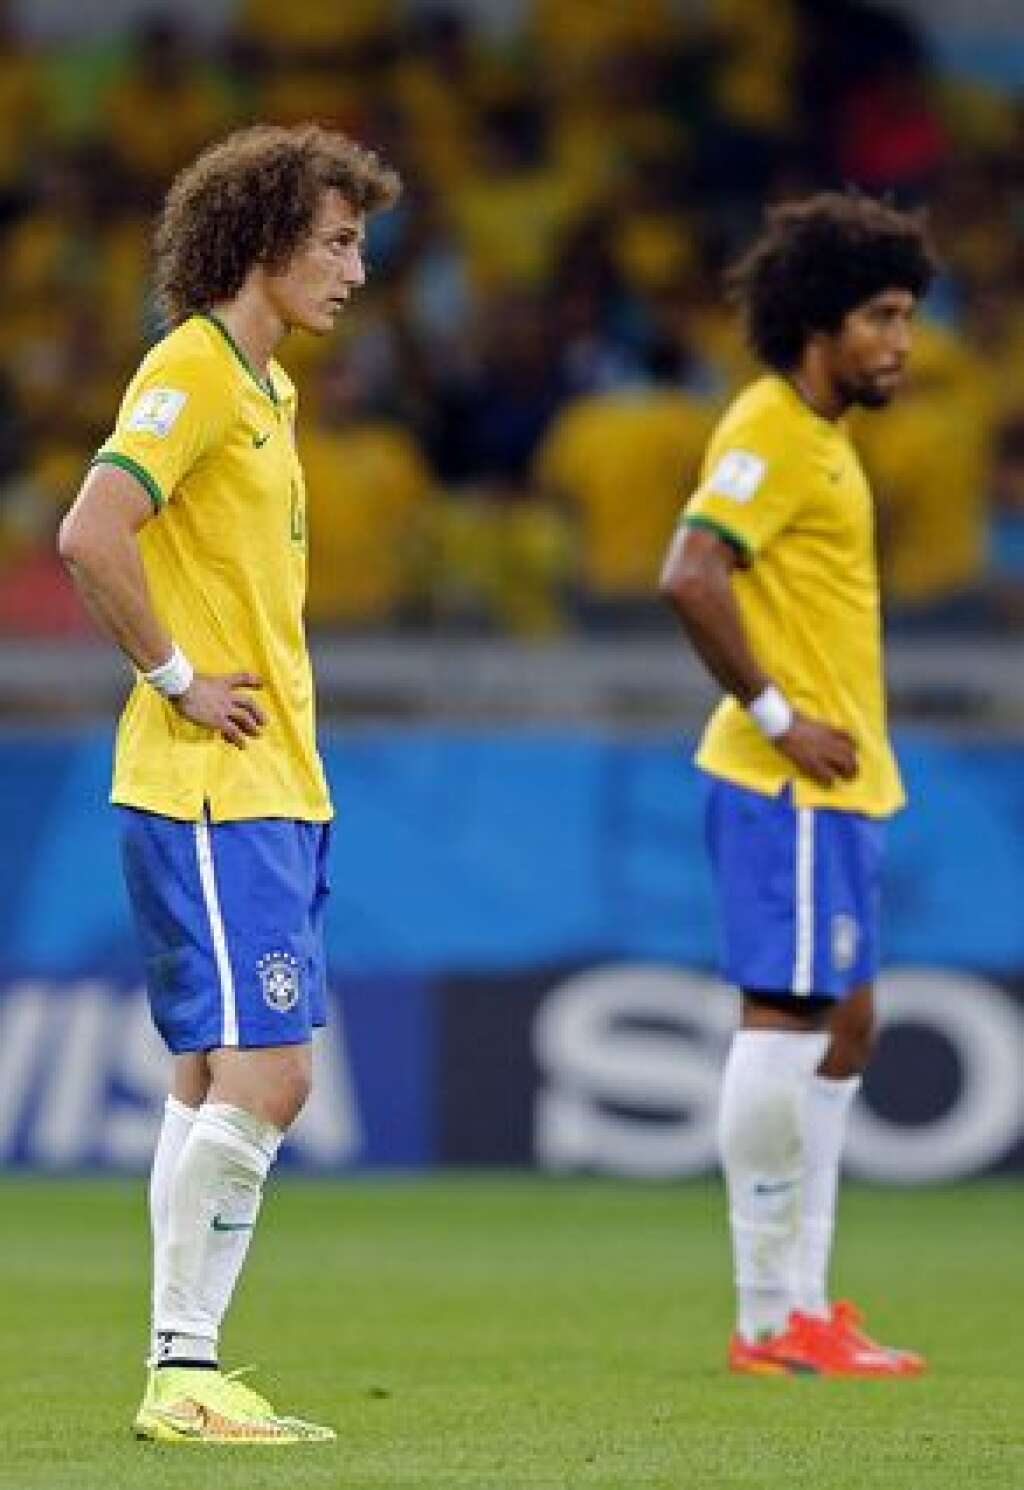 Brazil Soccer WCup Brazil Germany - Brazil's David Luiz, left, and Dante react after Germany scored their sixth goal during the World Cup semifinal soccer match between Brazil and Germany at the Mineirao Stadium in Belo Horizonte, Brazil, Tuesday, July 8, 2014. (AP Photo/Frank Augstein)